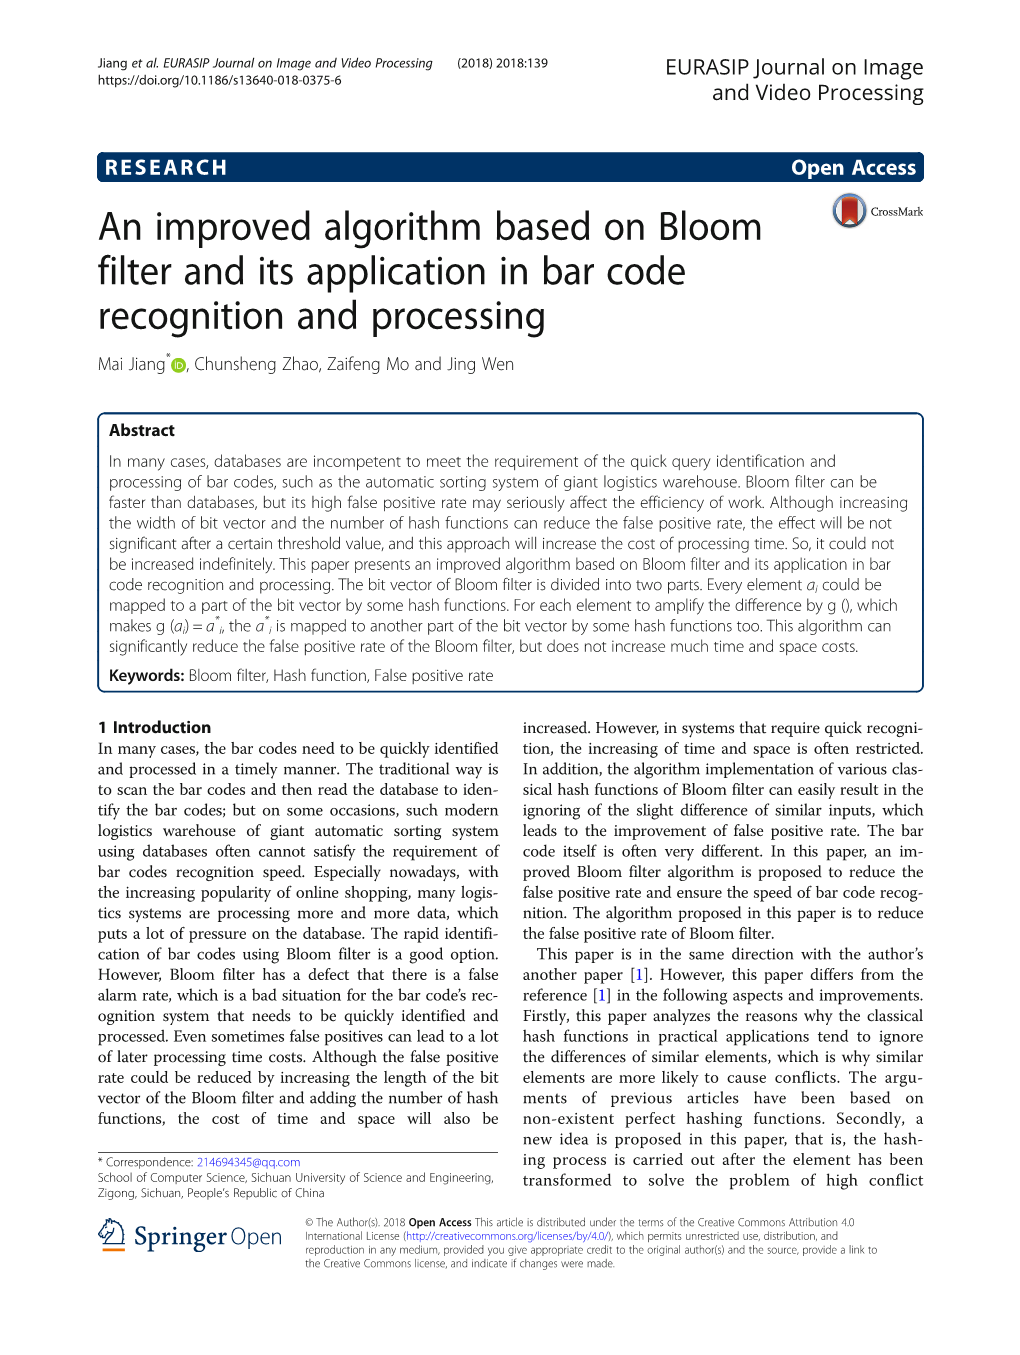 An Improved Algorithm Based on Bloom Filter and Its Application in Bar Code Recognition and Processing Mai Jiang* , Chunsheng Zhao, Zaifeng Mo and Jing Wen